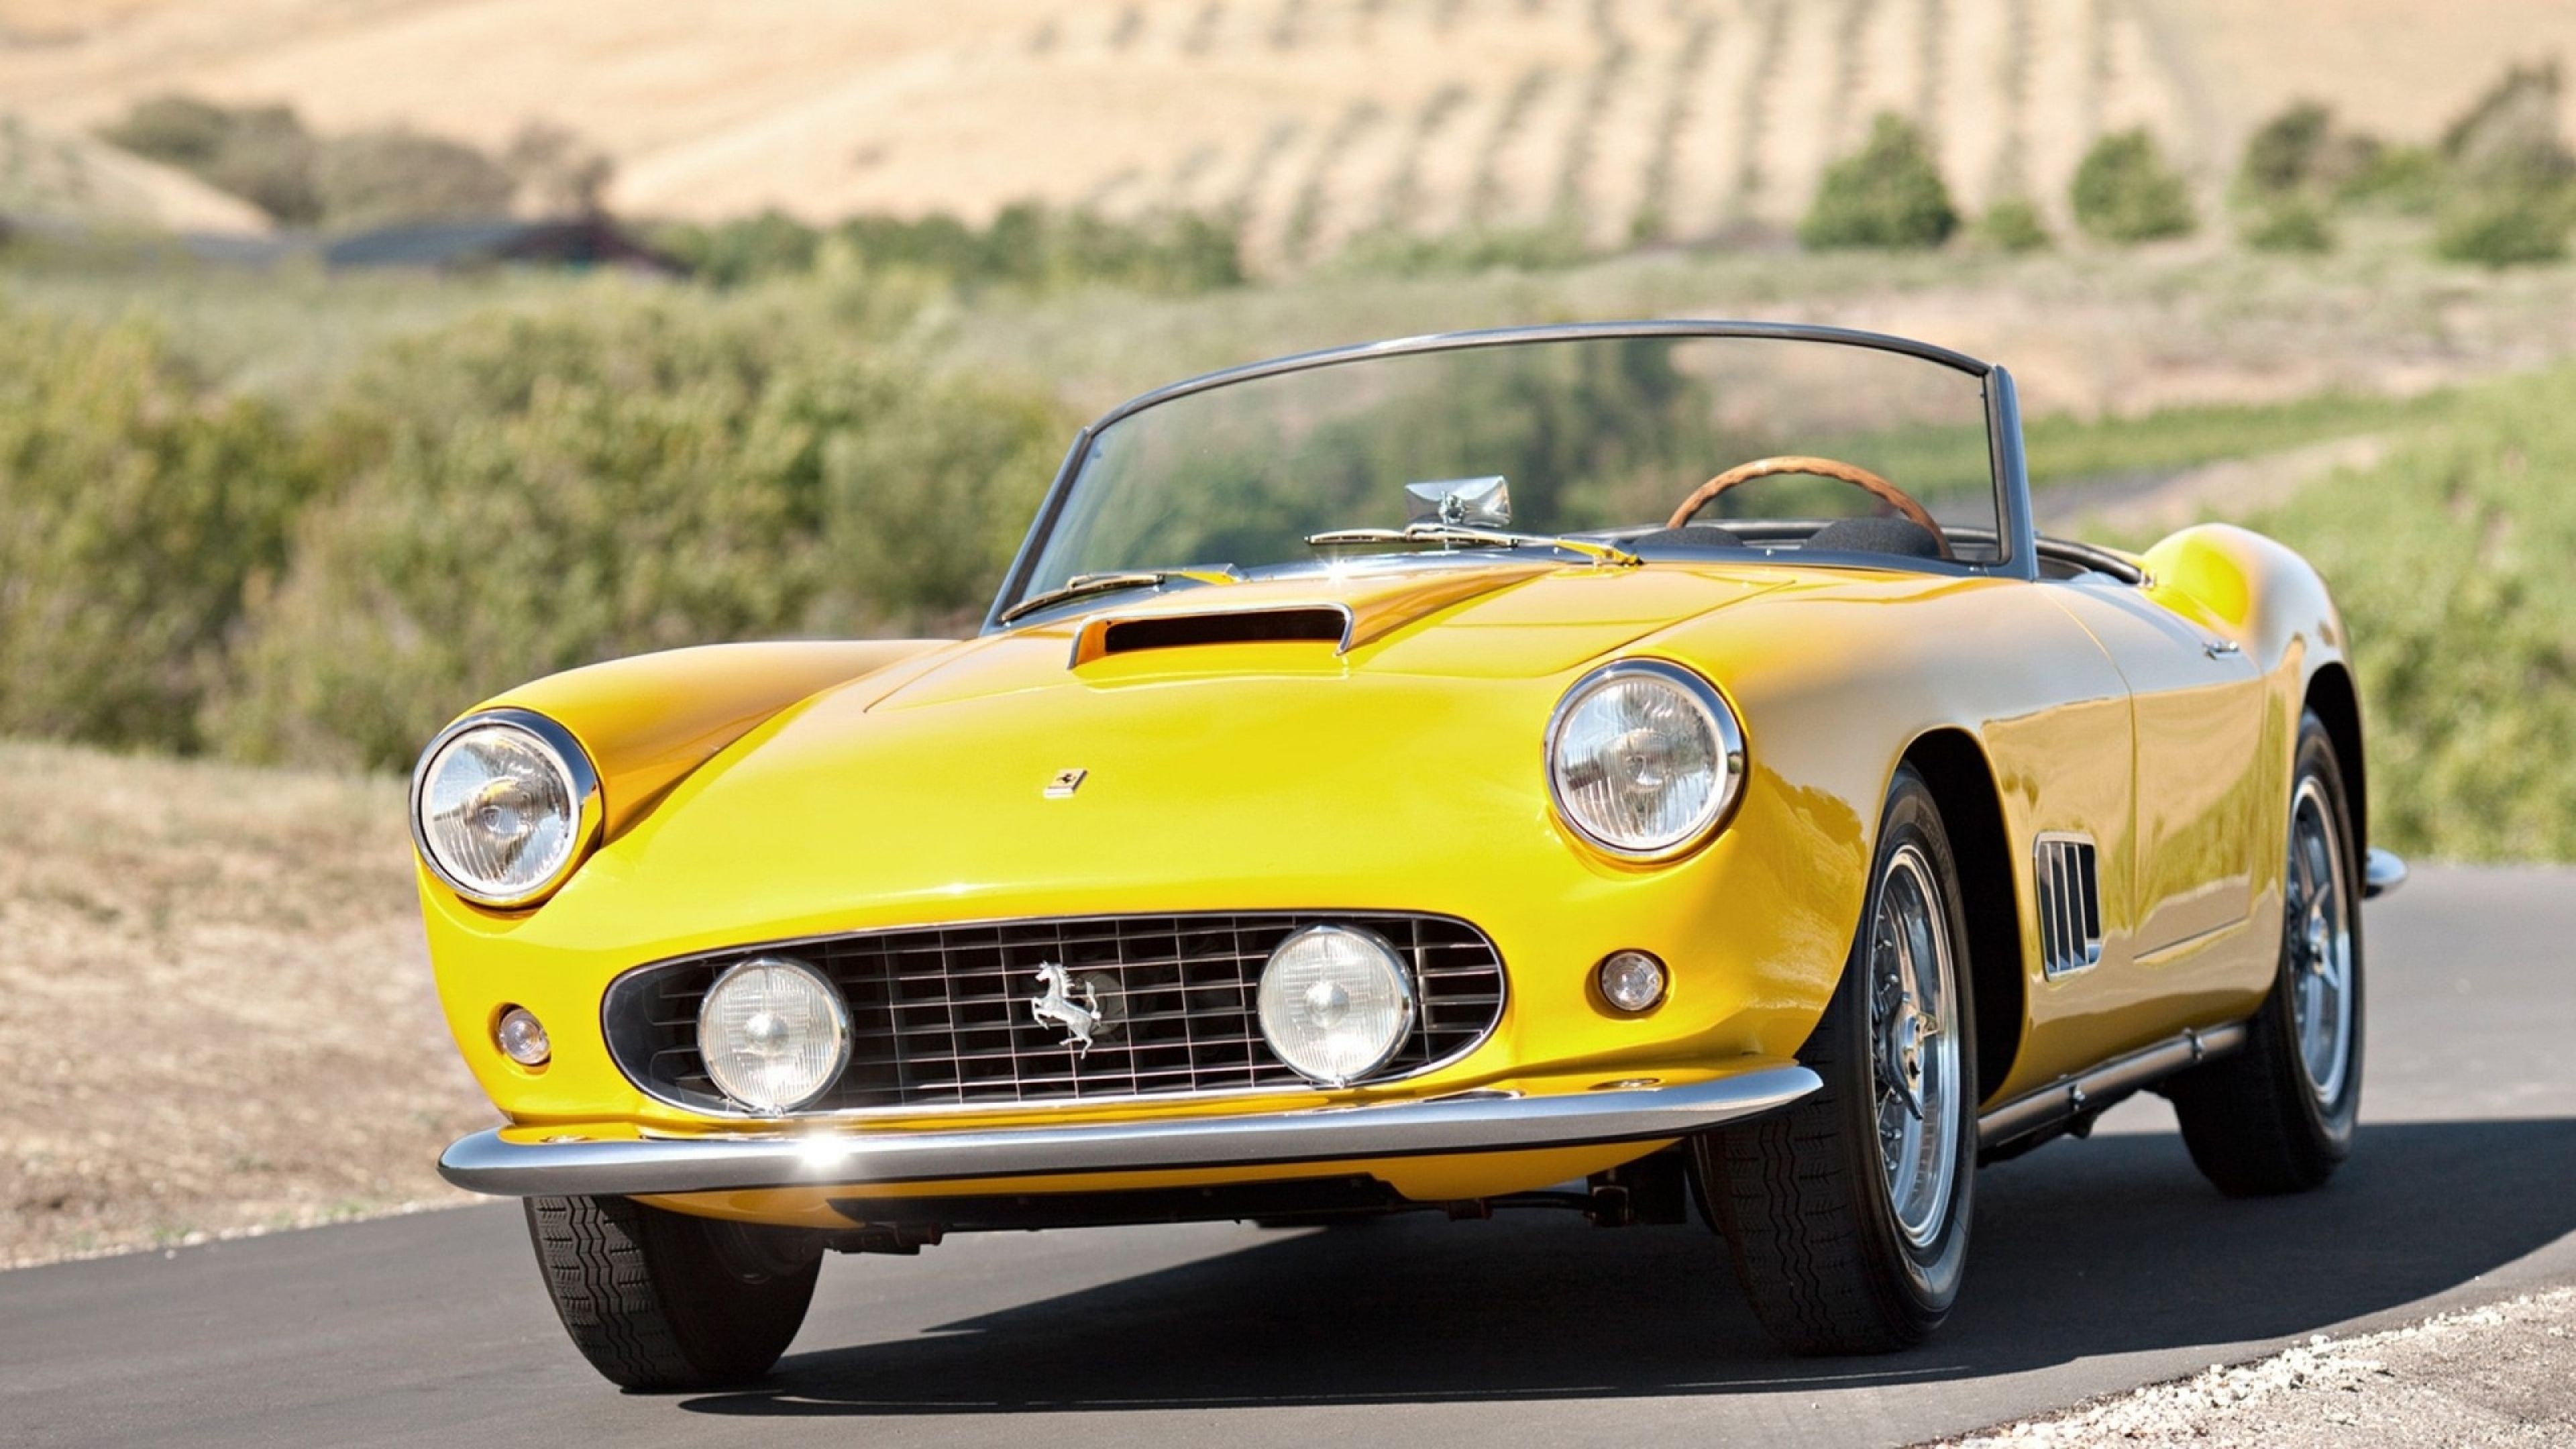 Vintage Car: Ferrari California, Admired for the historical significance and cultural value. 3840x2160 4K Background.